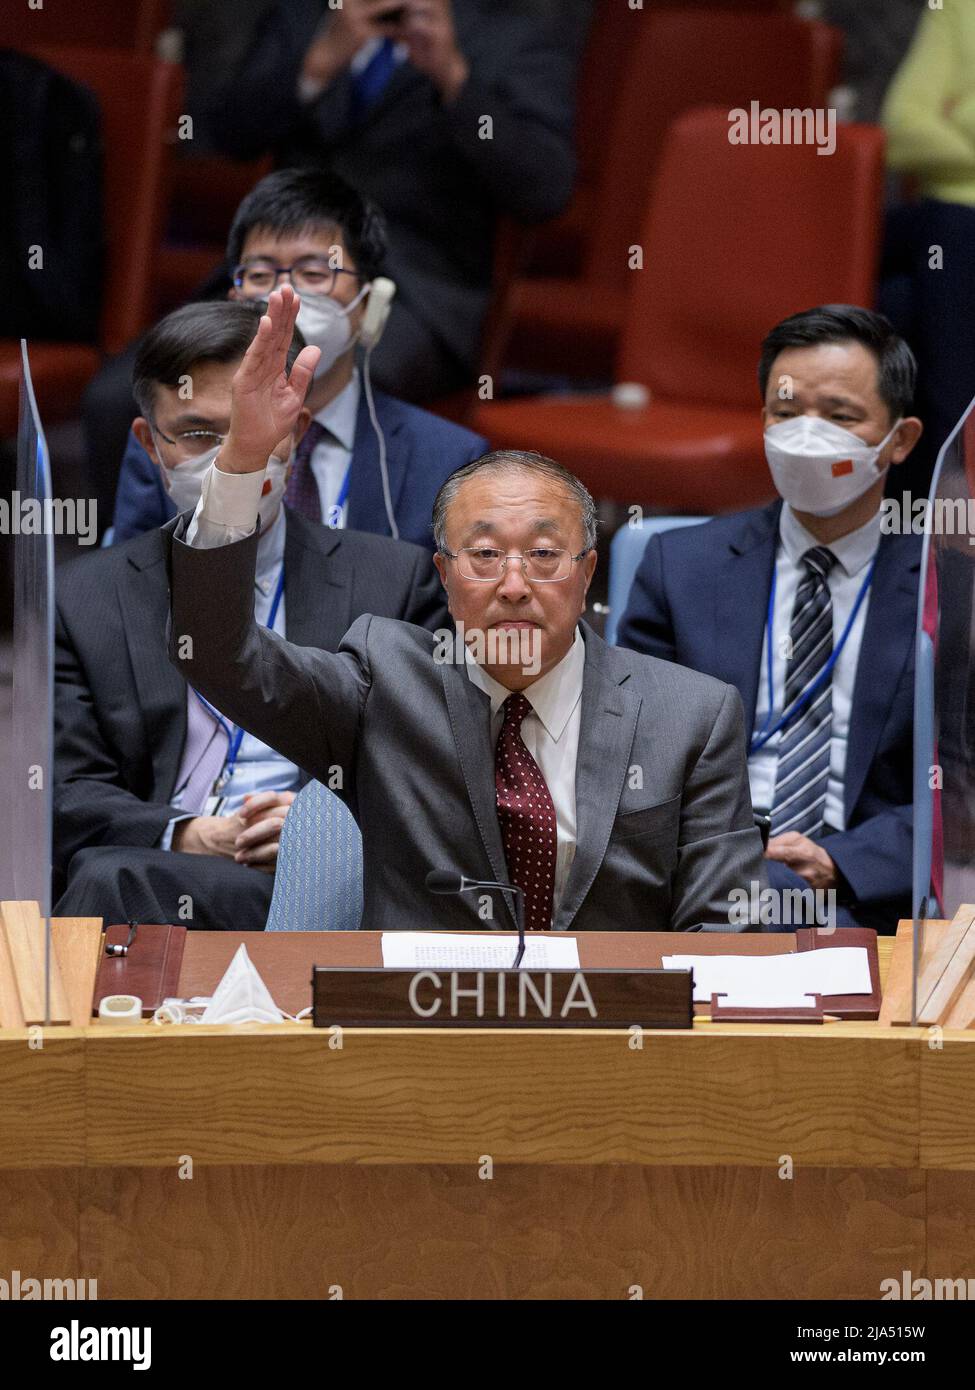 (220527) -- UNITED NATIONS, May 27, 2022 (Xinhua) -- Zhang Jun, China's permanent representative to the United Nations, raises his hand to veto a UN Security Council draft resolution aimed to impose new sanctions on the Democratic People's Republic of Korea (DPRK), at the UN Headquarters in New York, on May 26, 2022. (Manuel Elias/UN Photo/Handout via Xinhua) Stock Photo